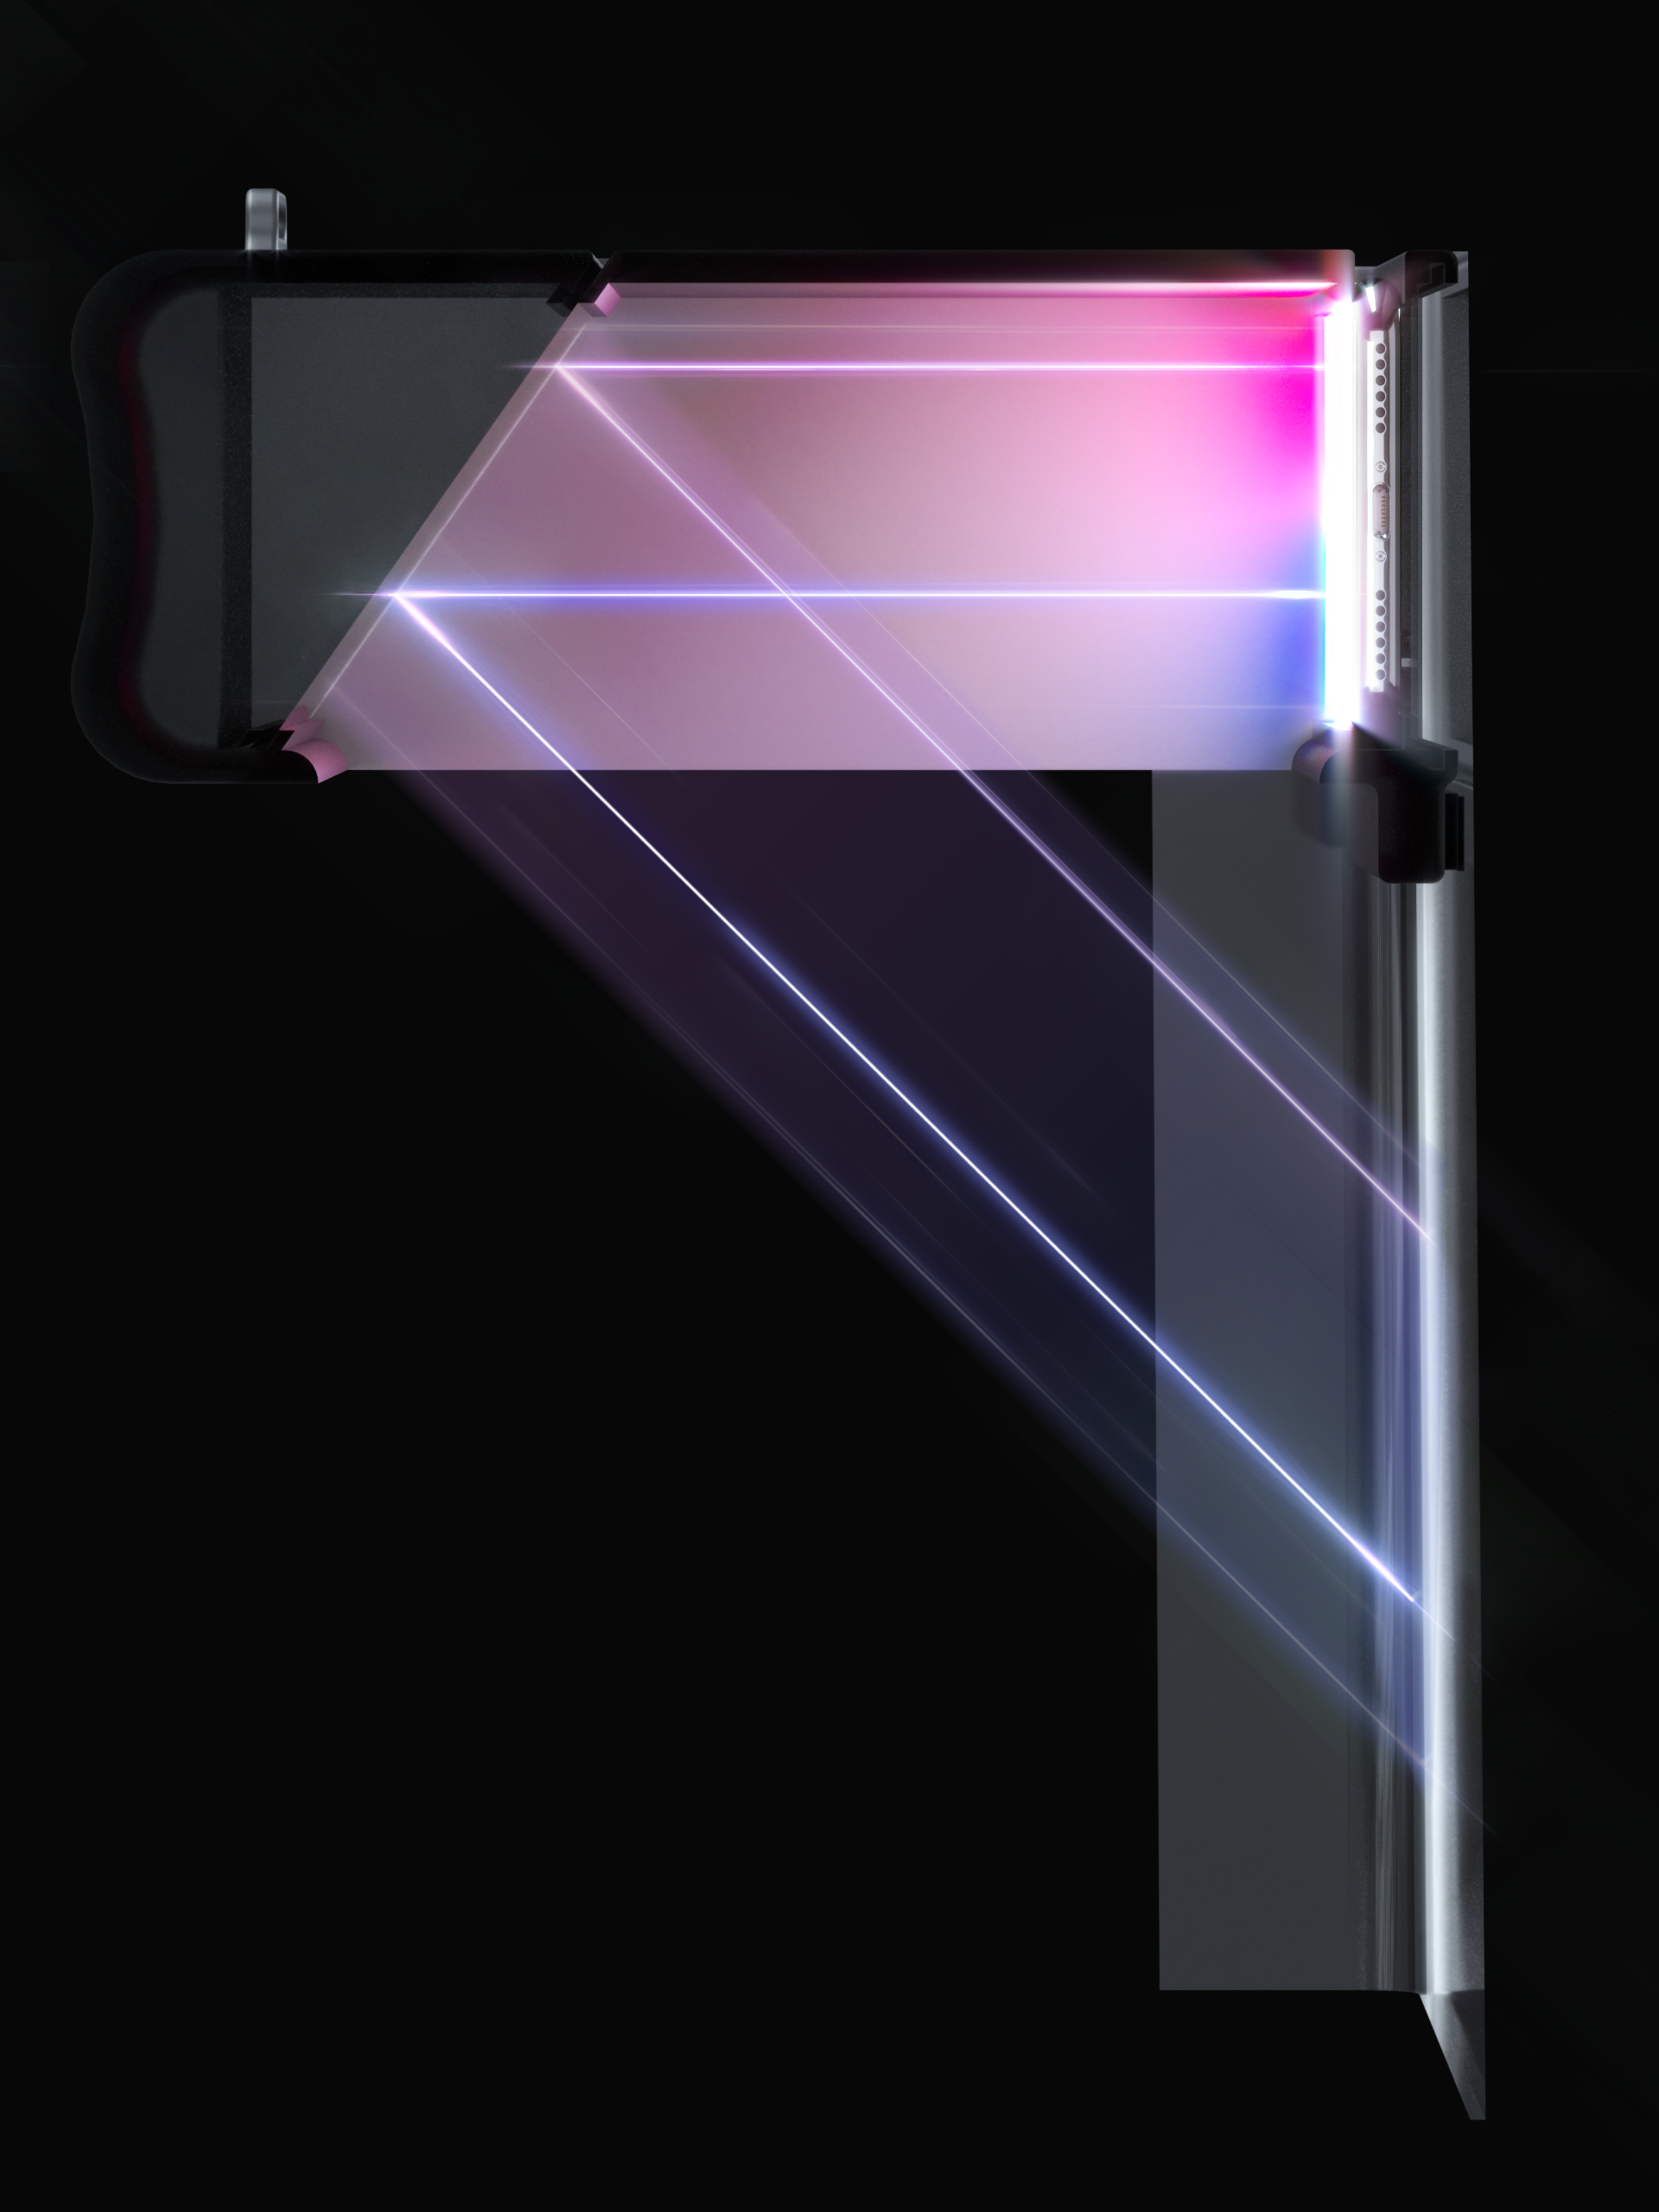 A 3d render of the supervisor device.